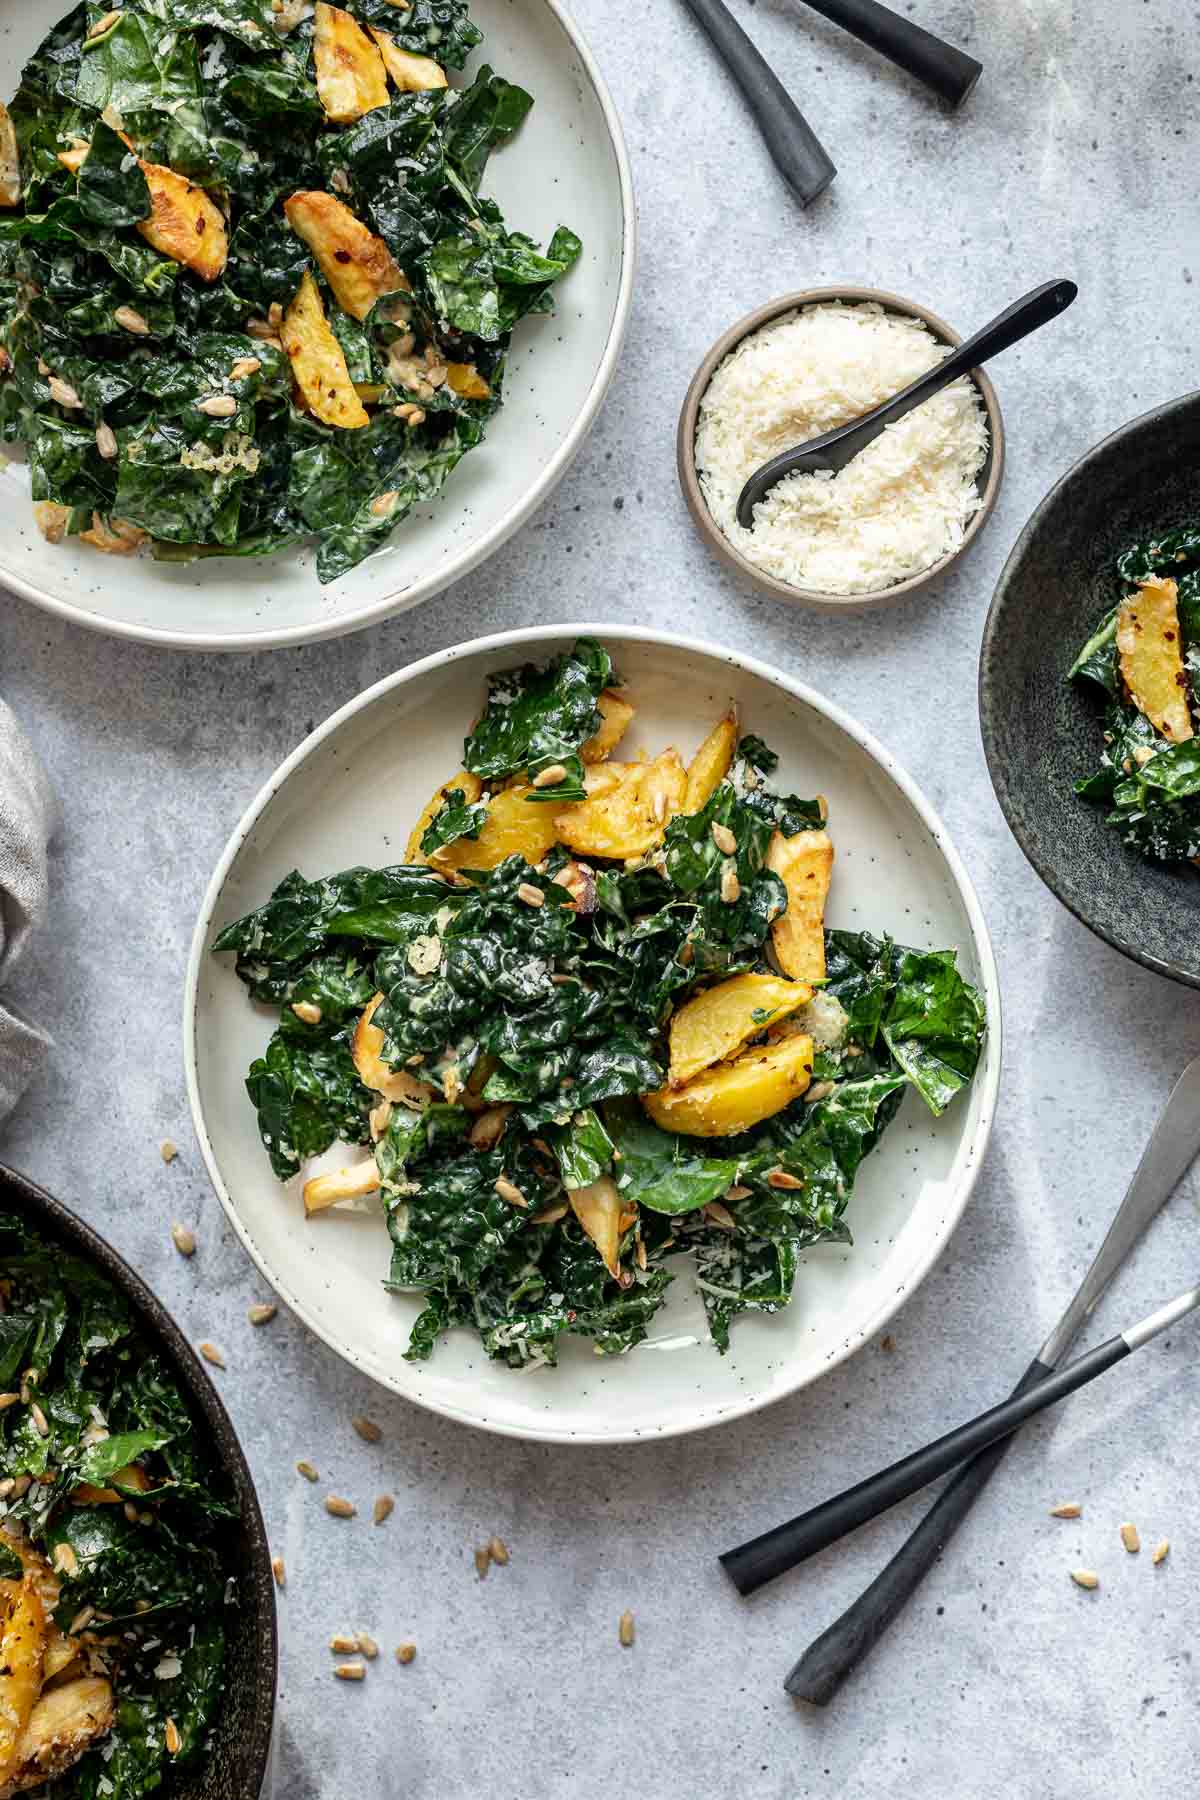 Fall Salad with Tuscan Kale and Parmesan-Roasted Potatoes